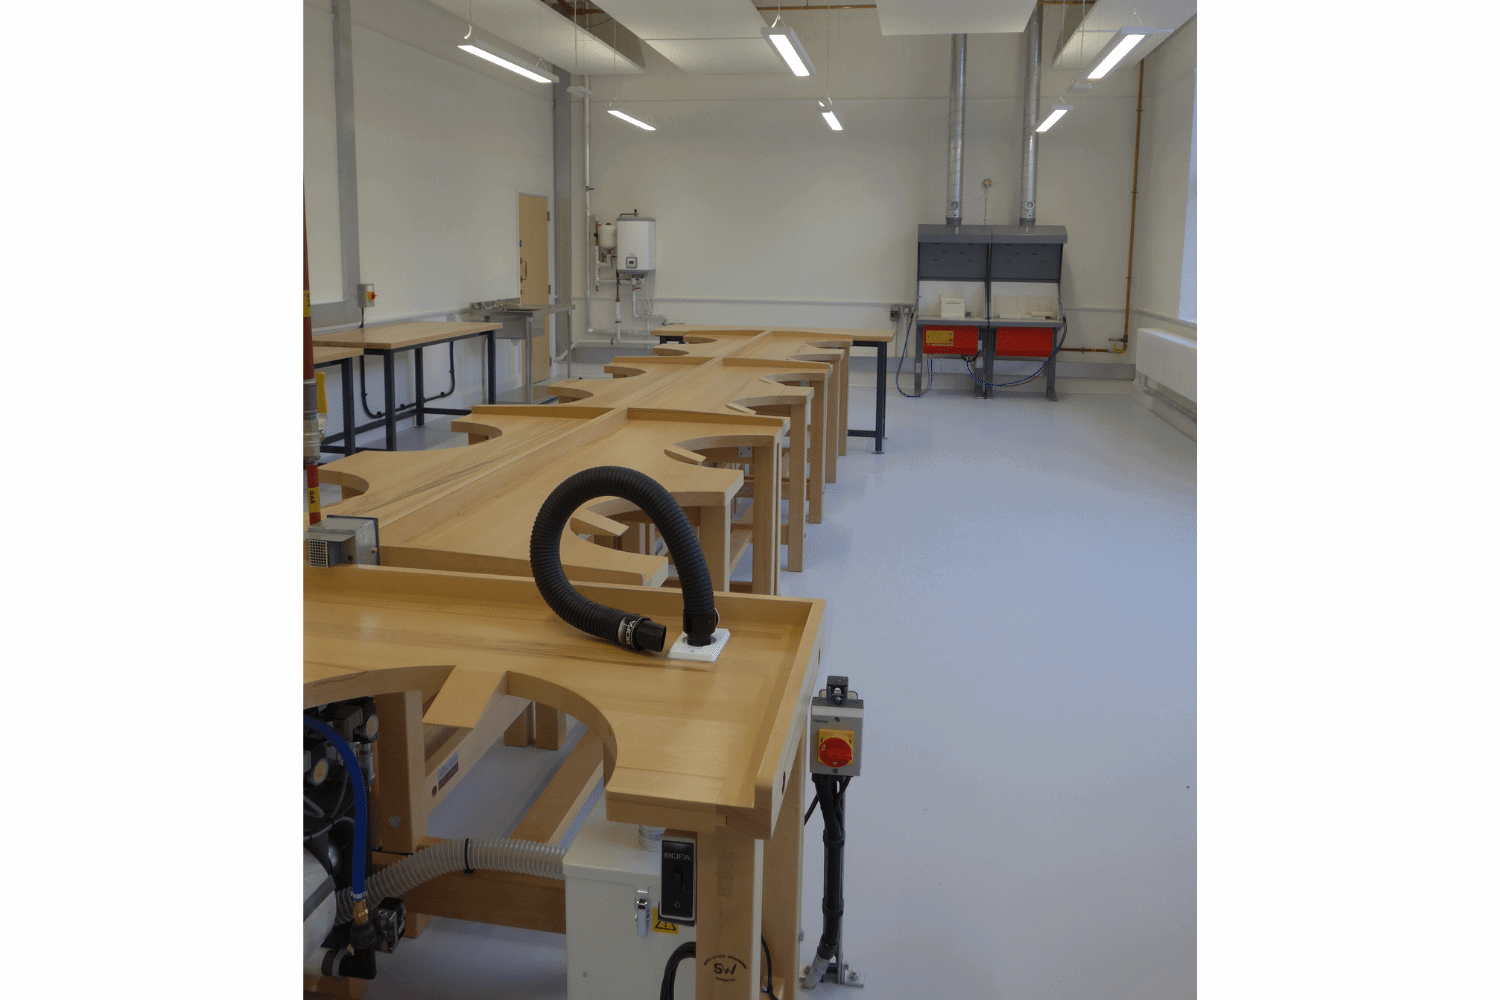 Jewellery Making and Silversmithing studio at The Amelia